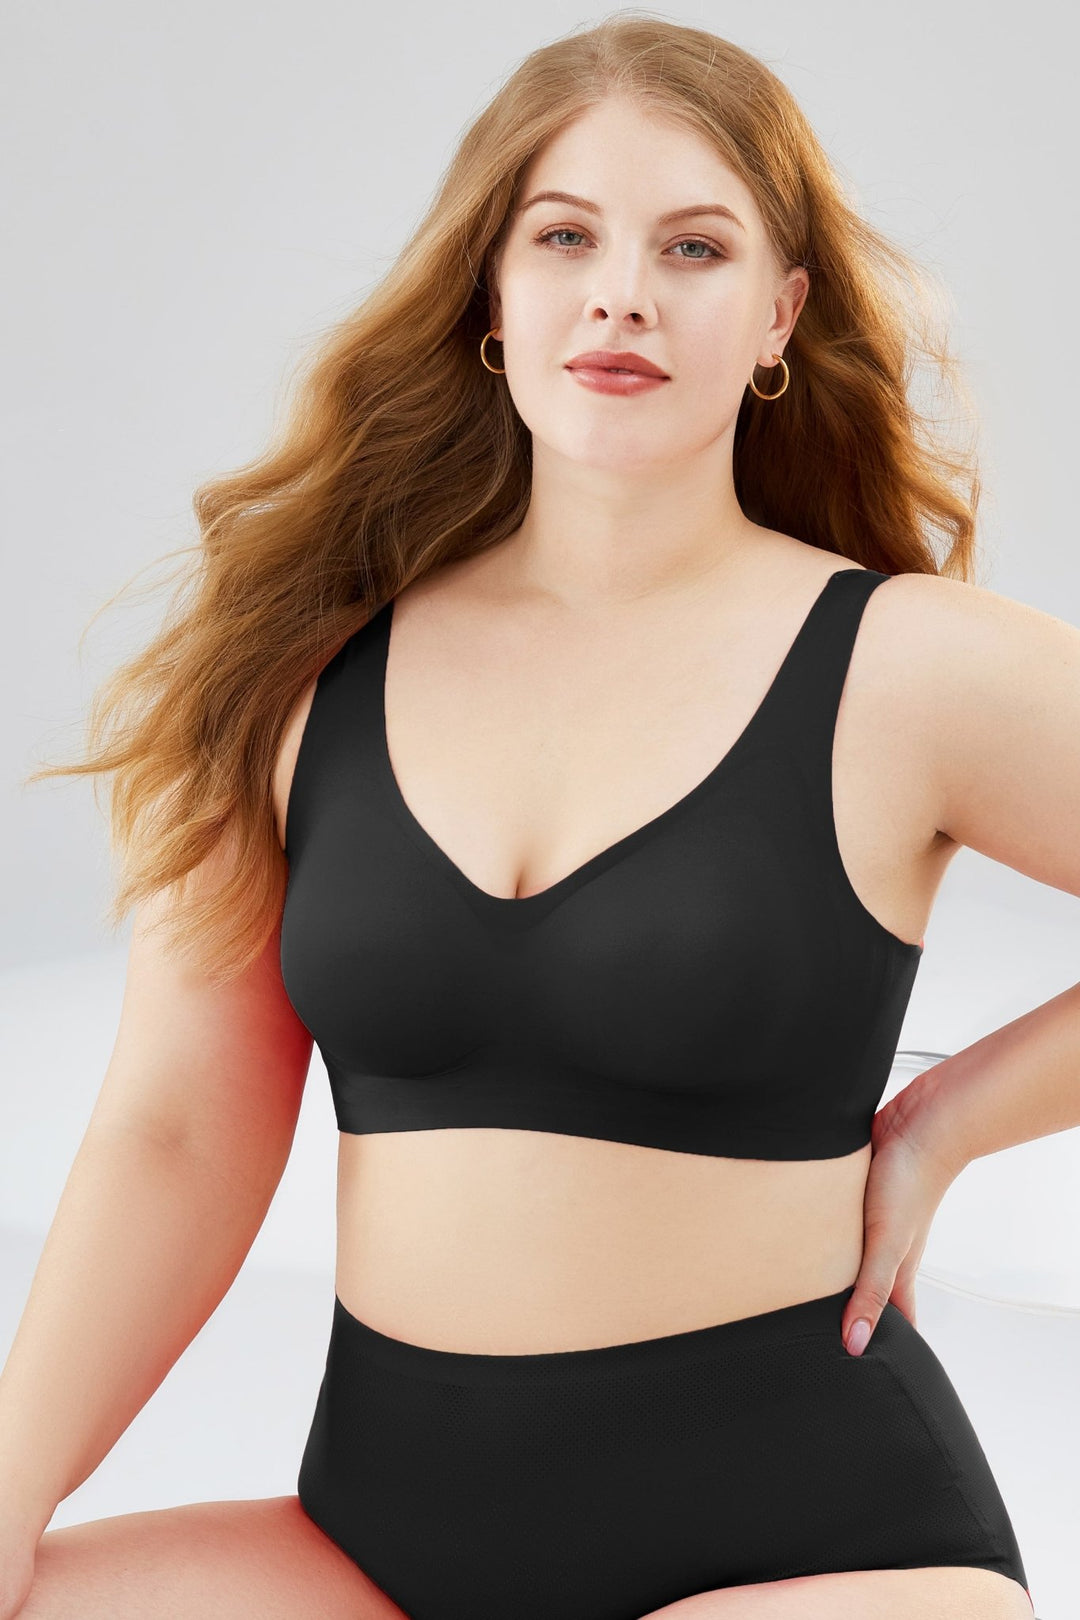 Plus Size Lingerie & Intimates: Embracing Curves with Confidence